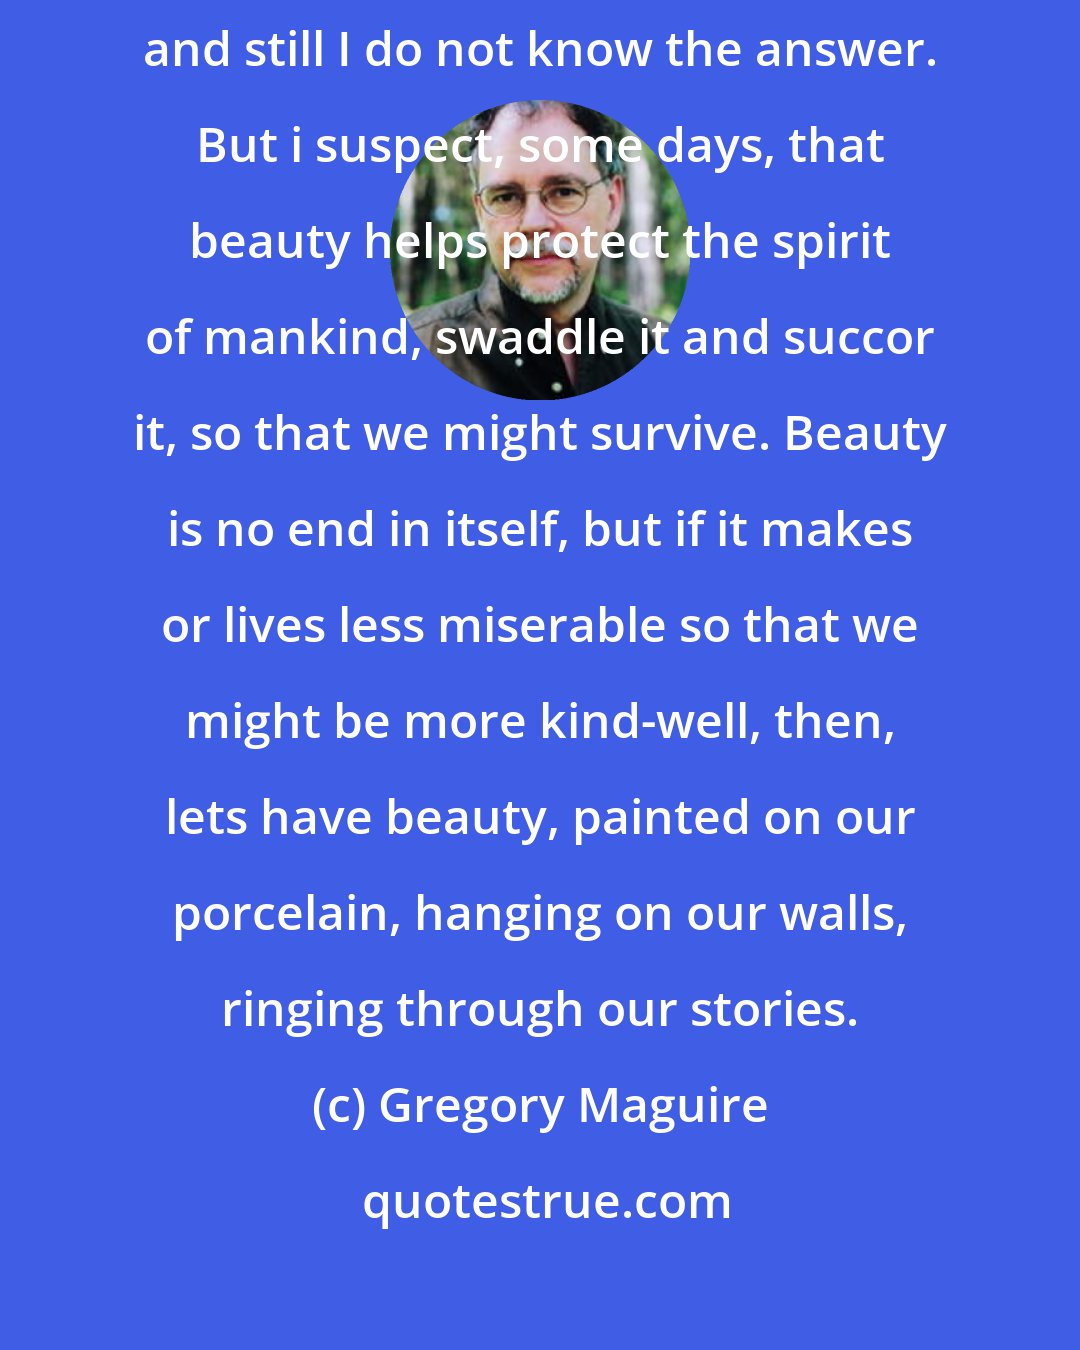 Gregory Maguire: ...What is the use of beauty? i have lived my life surrounded by painters, and still I do not know the answer. But i suspect, some days, that beauty helps protect the spirit of mankind, swaddle it and succor it, so that we might survive. Beauty is no end in itself, but if it makes or lives less miserable so that we might be more kind-well, then, lets have beauty, painted on our porcelain, hanging on our walls, ringing through our stories.